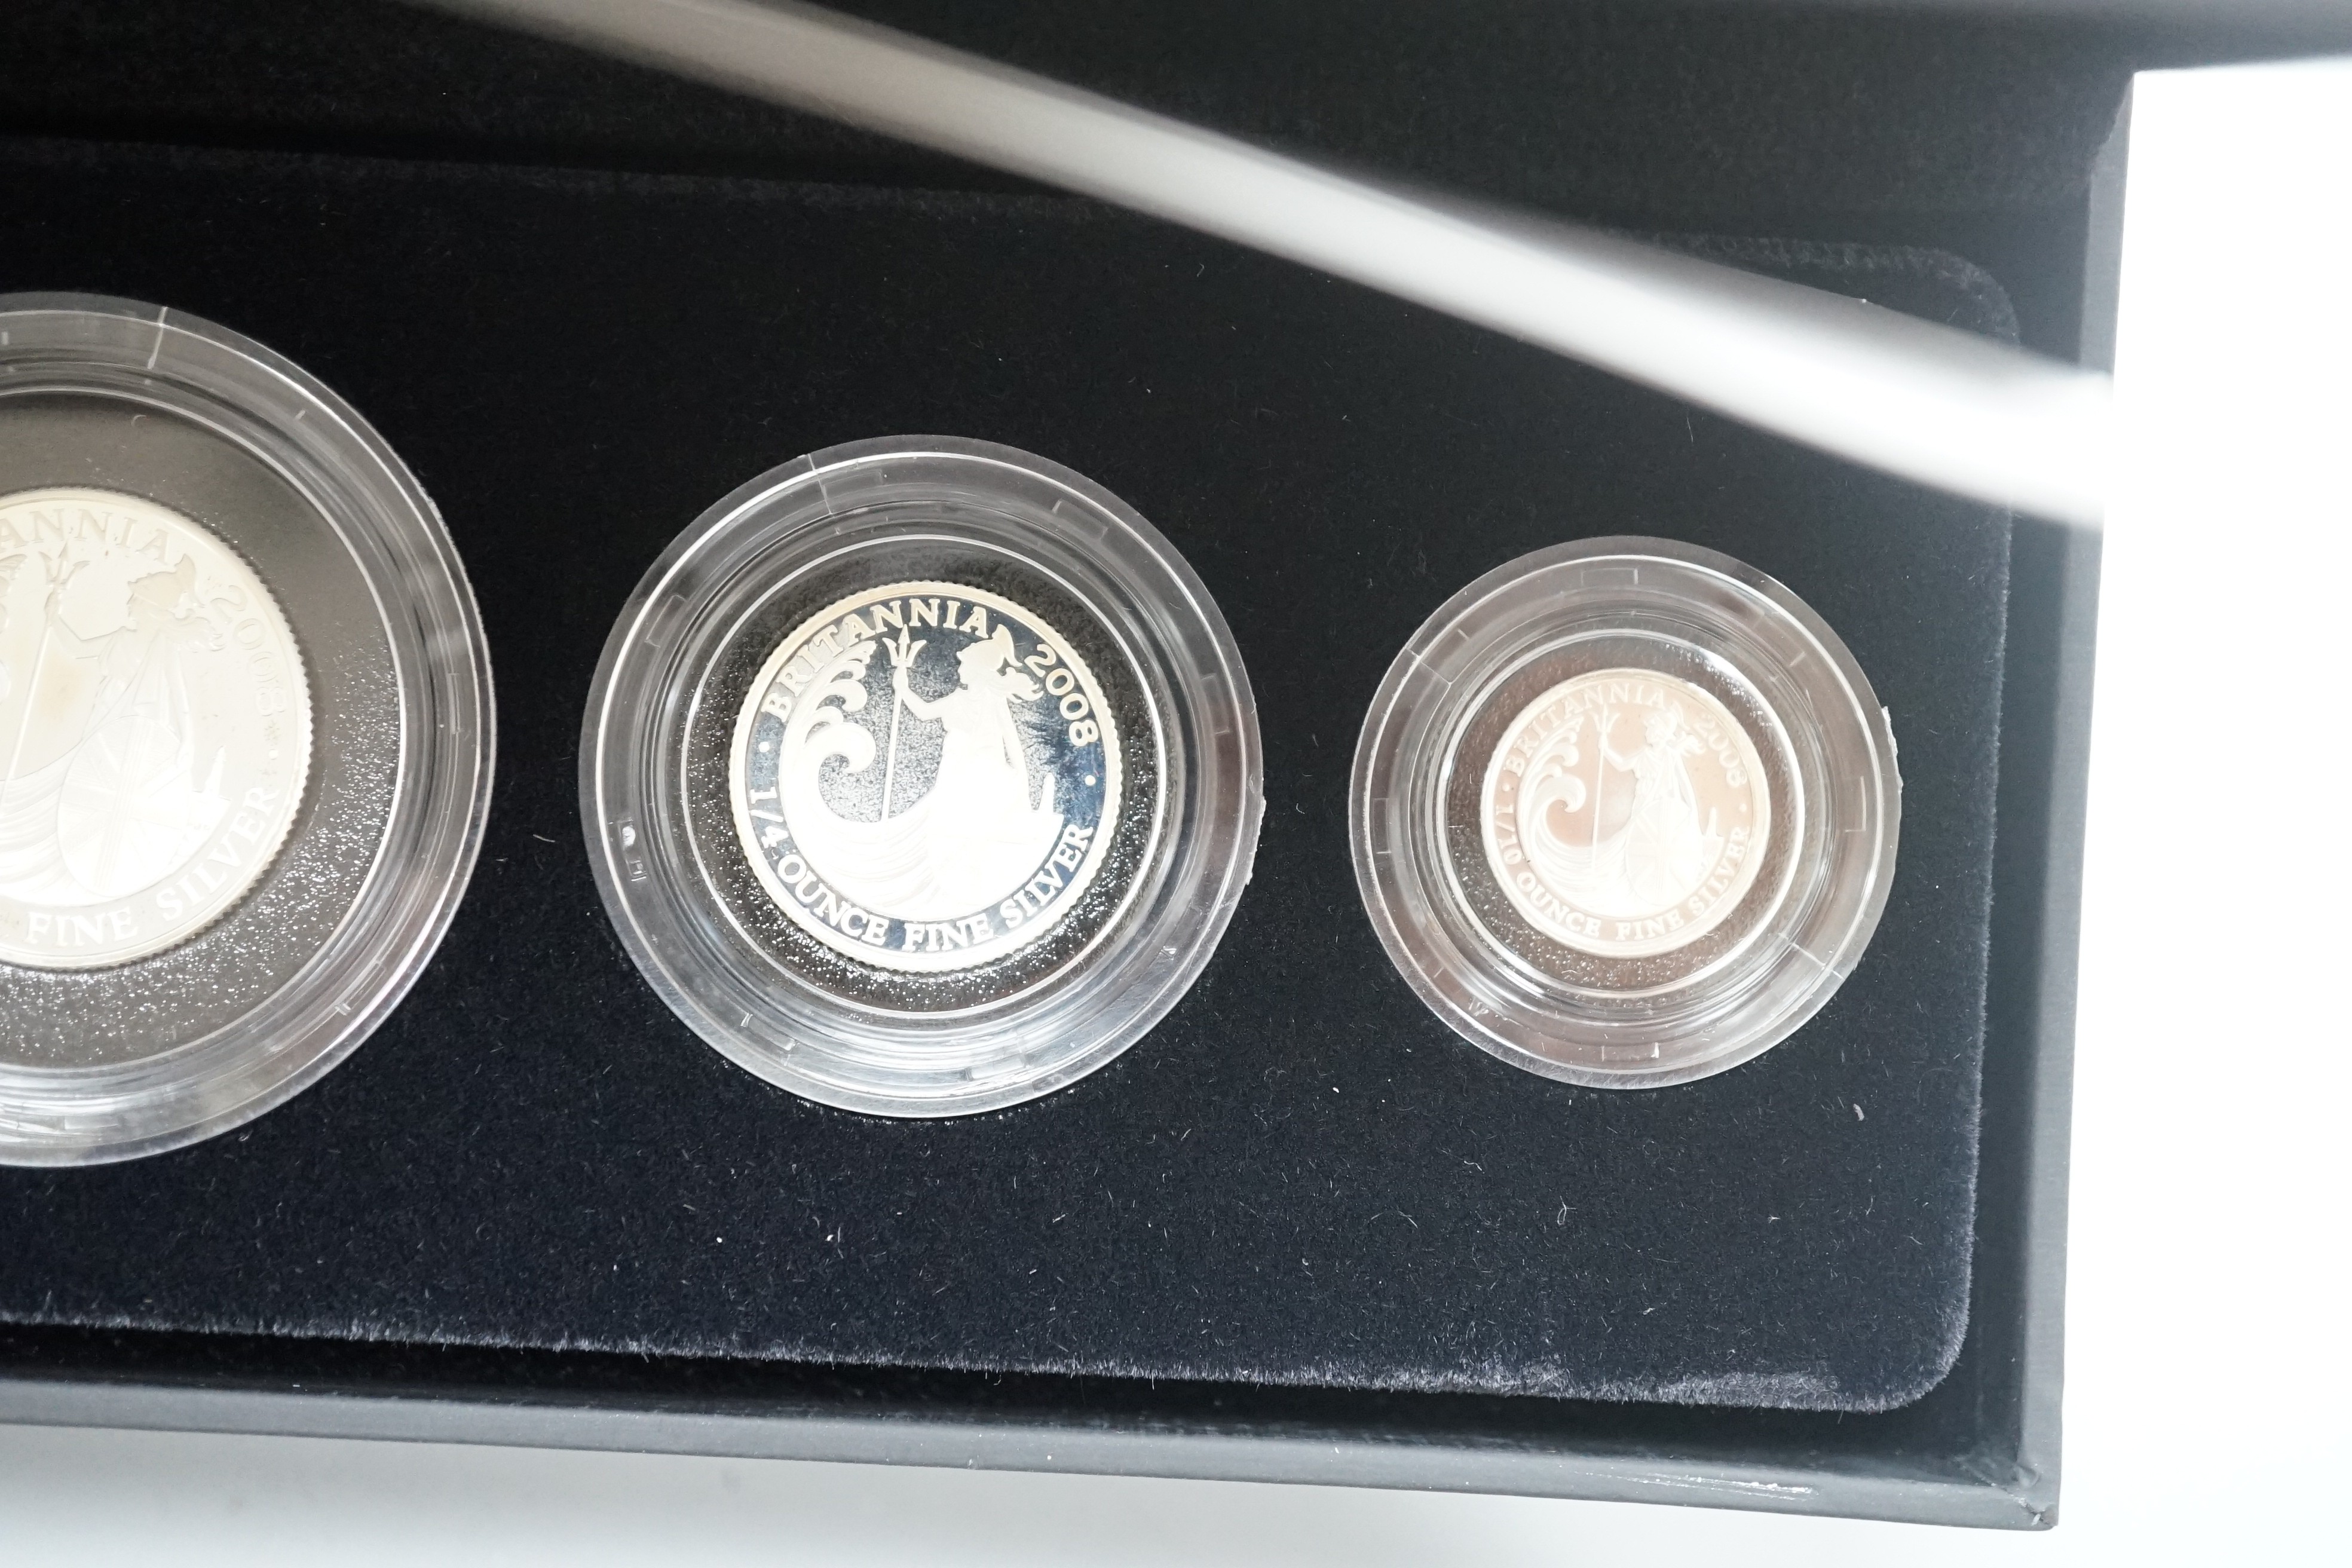 Two cased Royal Mint Britannia silver proof four coin sets, 2005 and 2008, 20p to £2